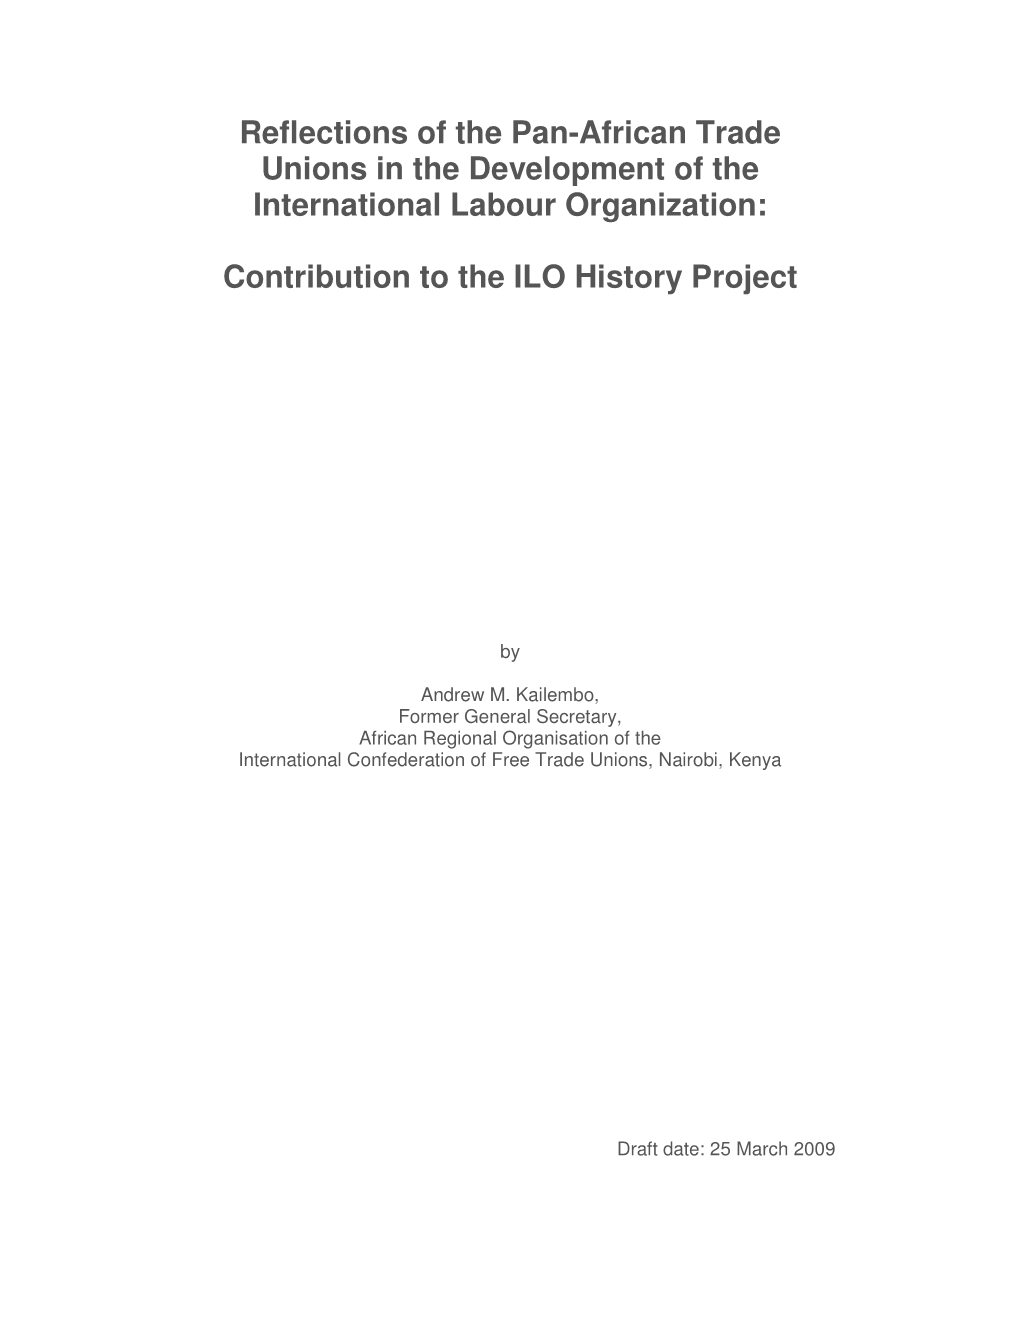 Reflections of the Pan-African Trade Unions in the Development of the International Labour Organization